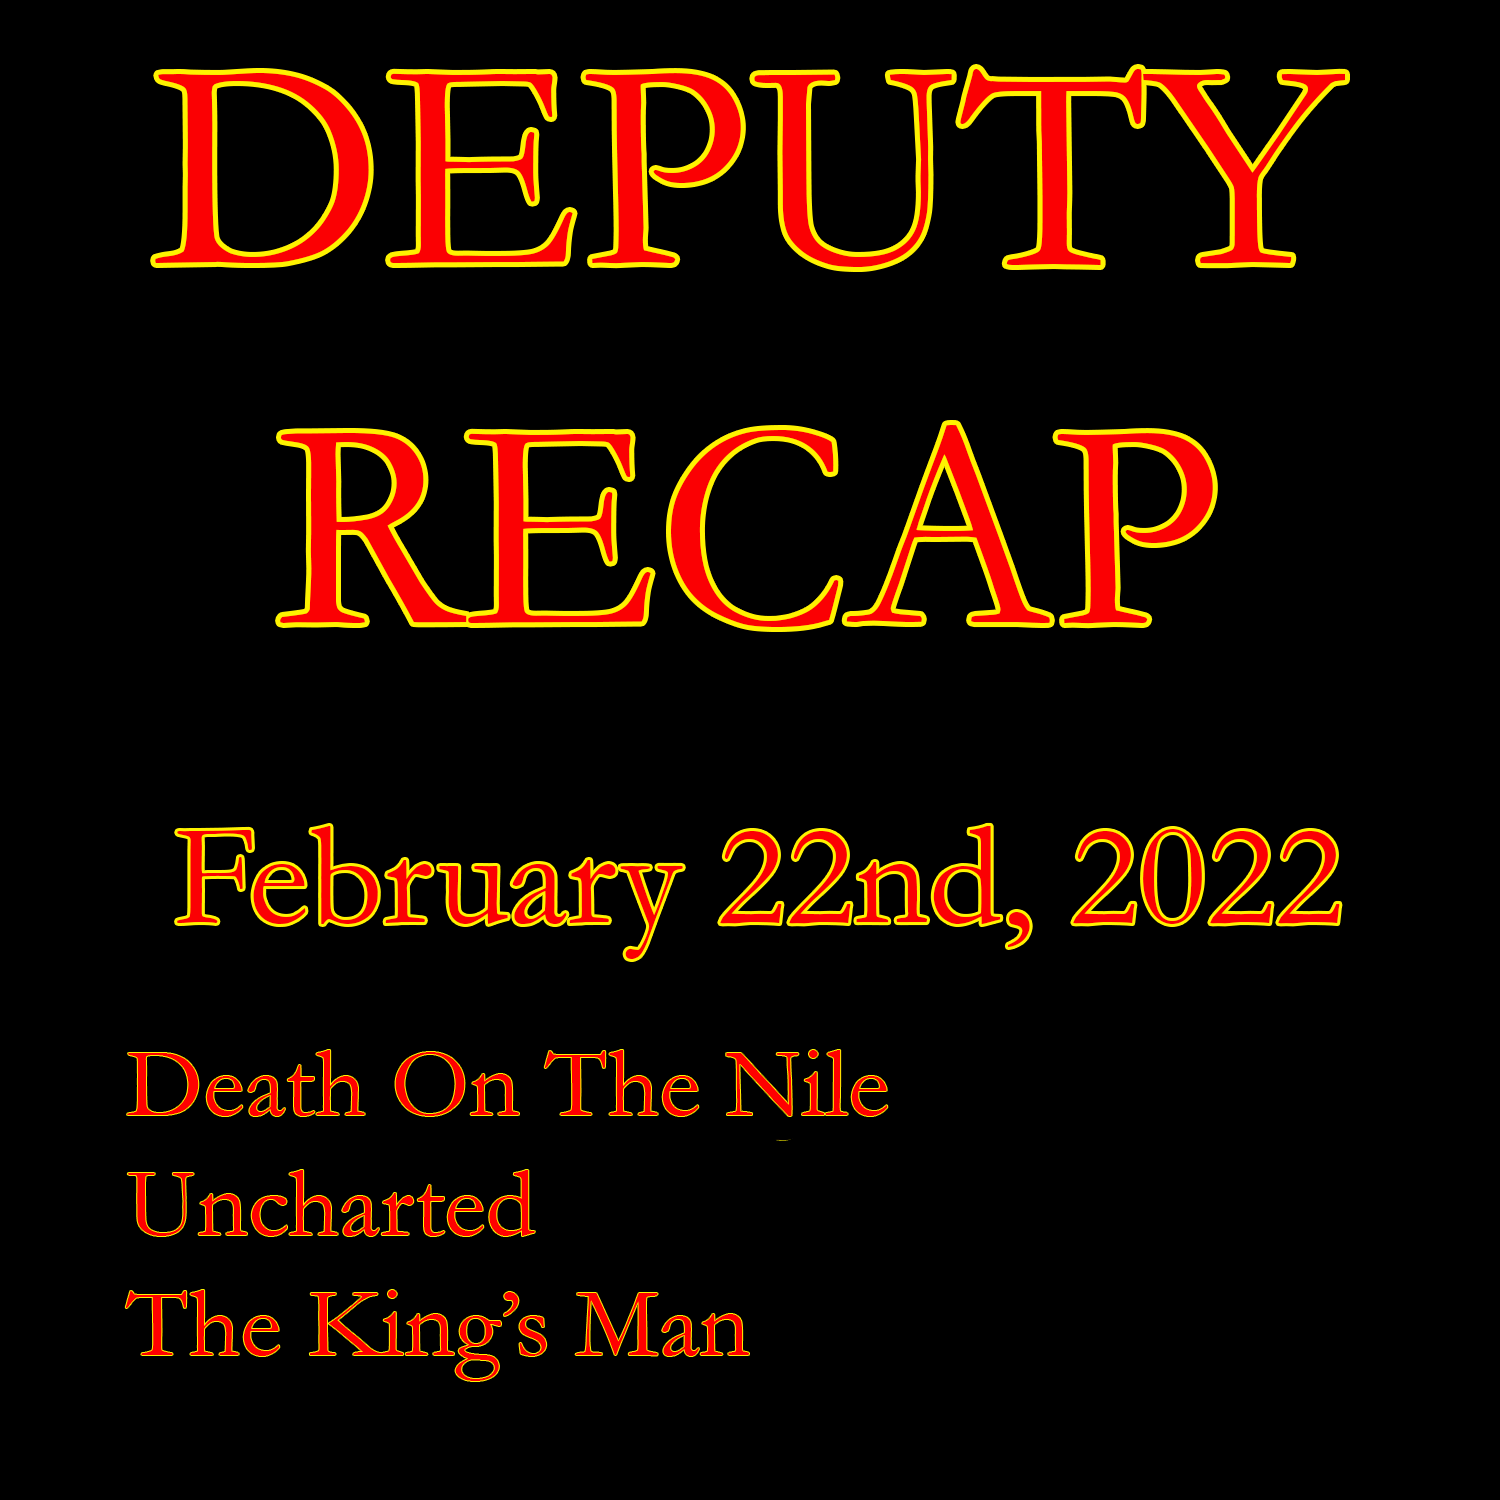 Movie Recap - February 22nd, 2022 (Two&#39;s Day / Tuesday)